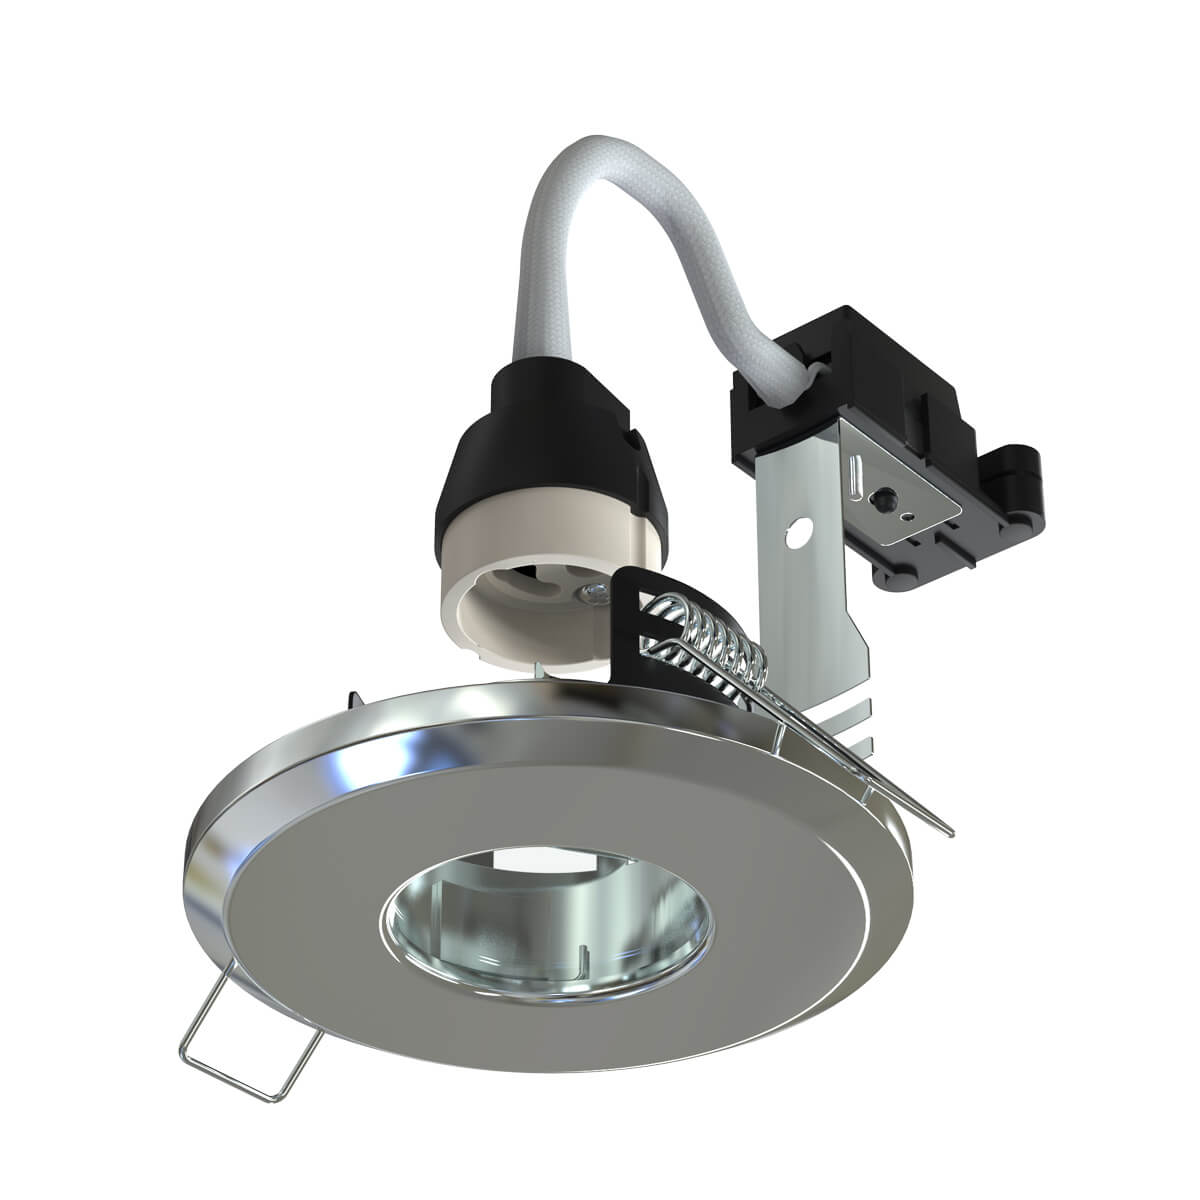 View IP65 Rated Fixed Shower Downlight Polished Chrome Finish information